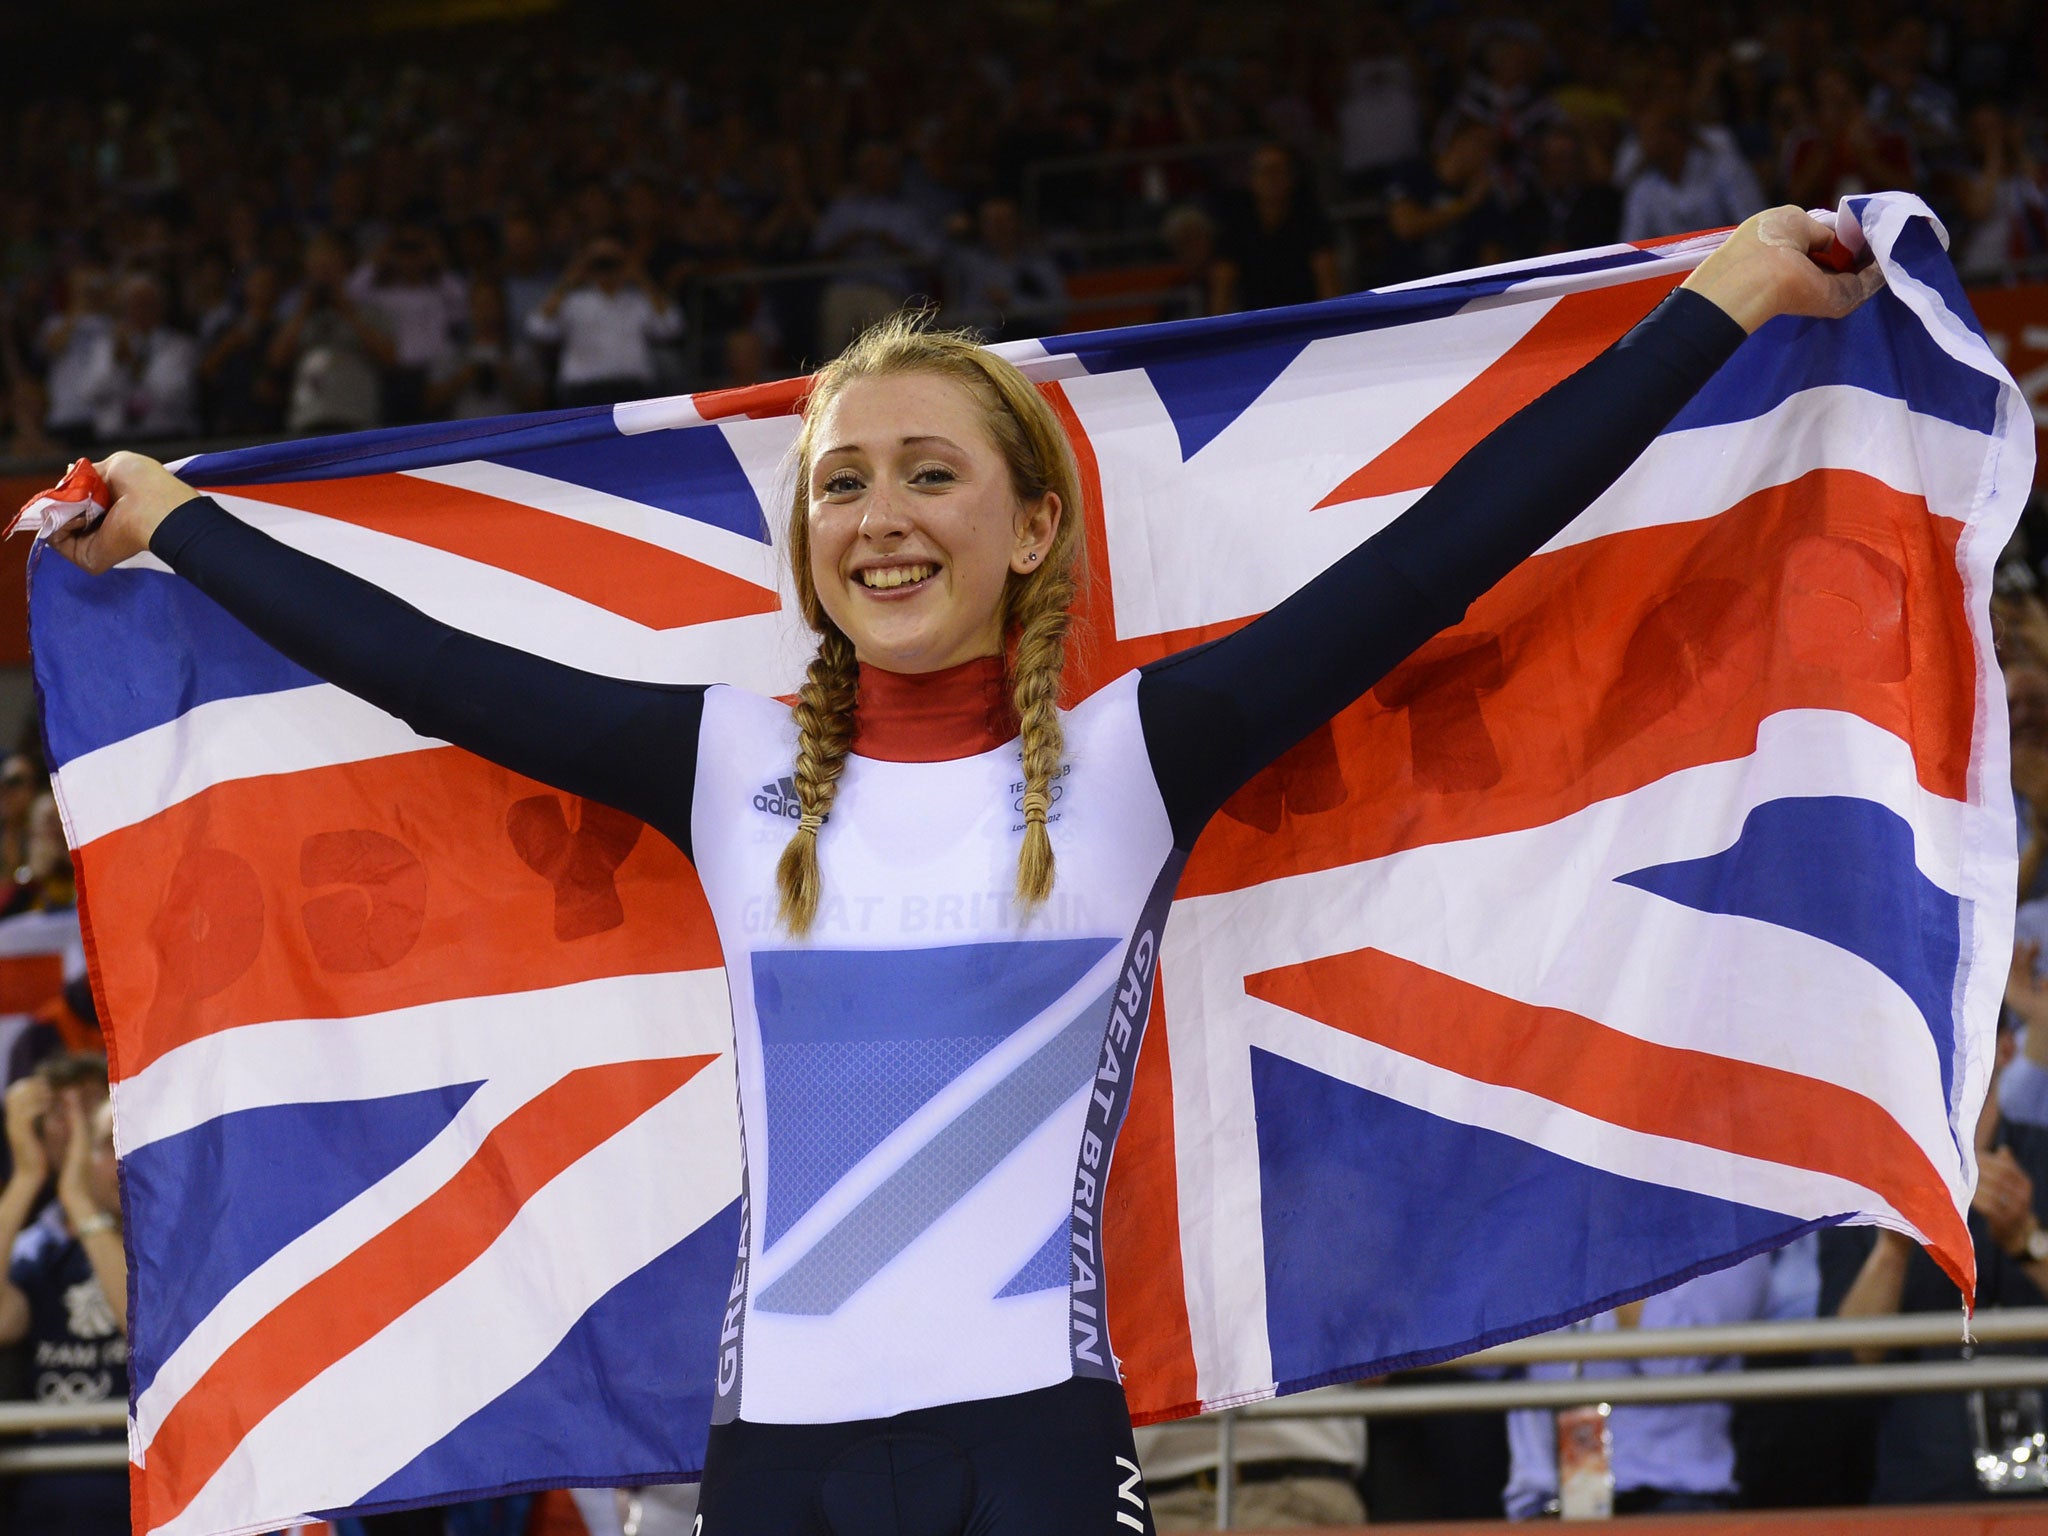 Today women are spoilt for choice in terms of sporting role models like cyclist Laura Trott